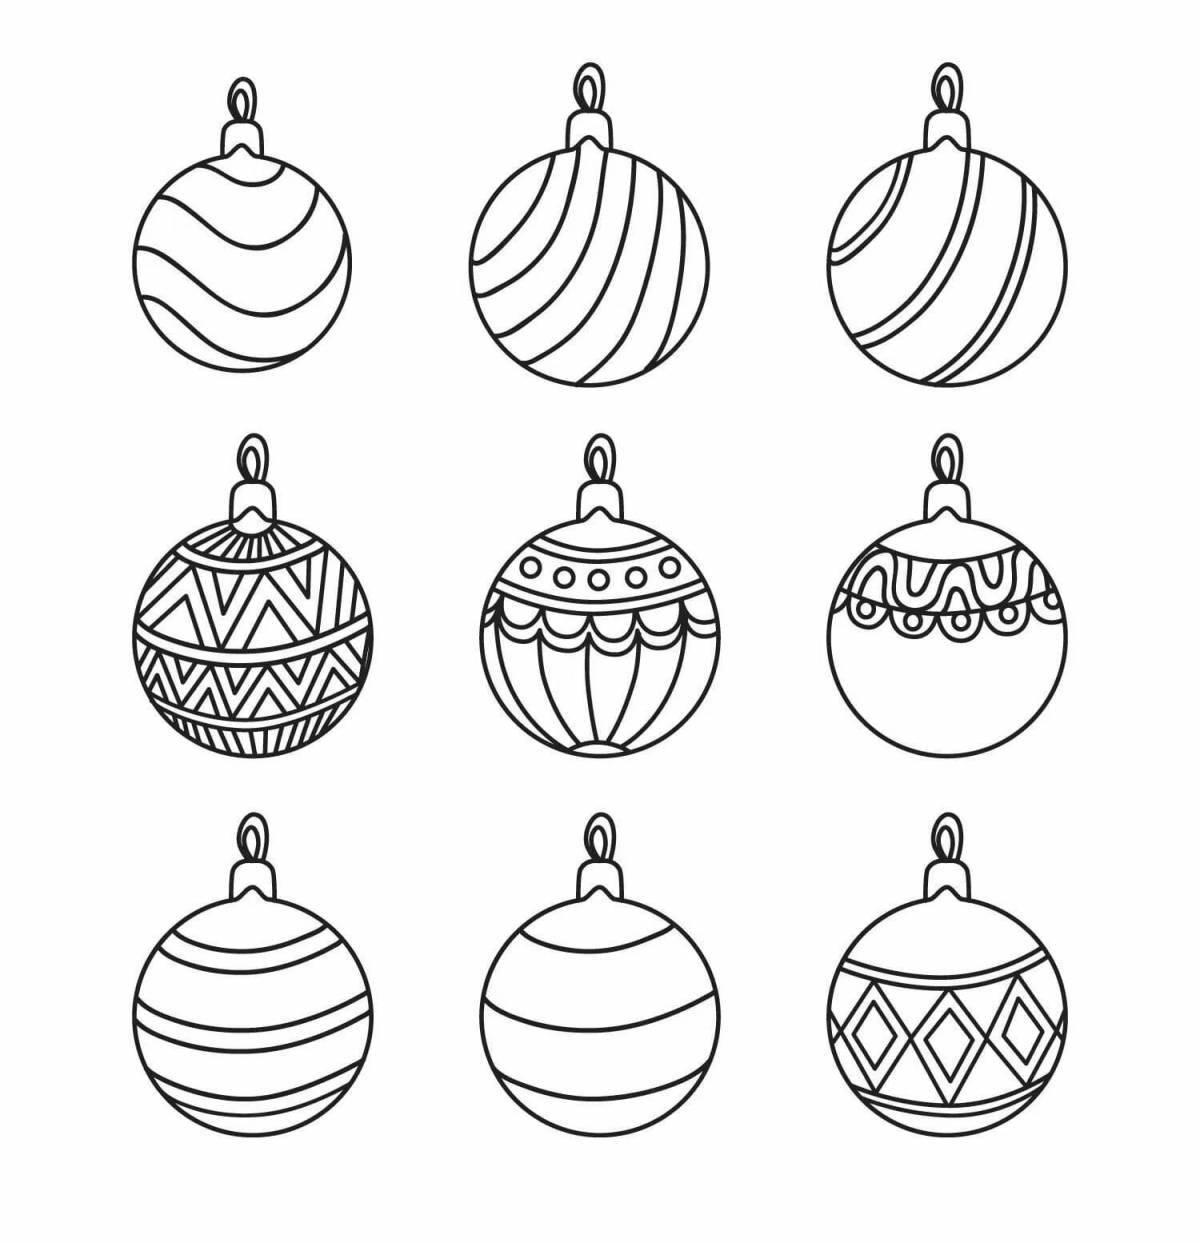 Merry Christmas ball coloring for kids